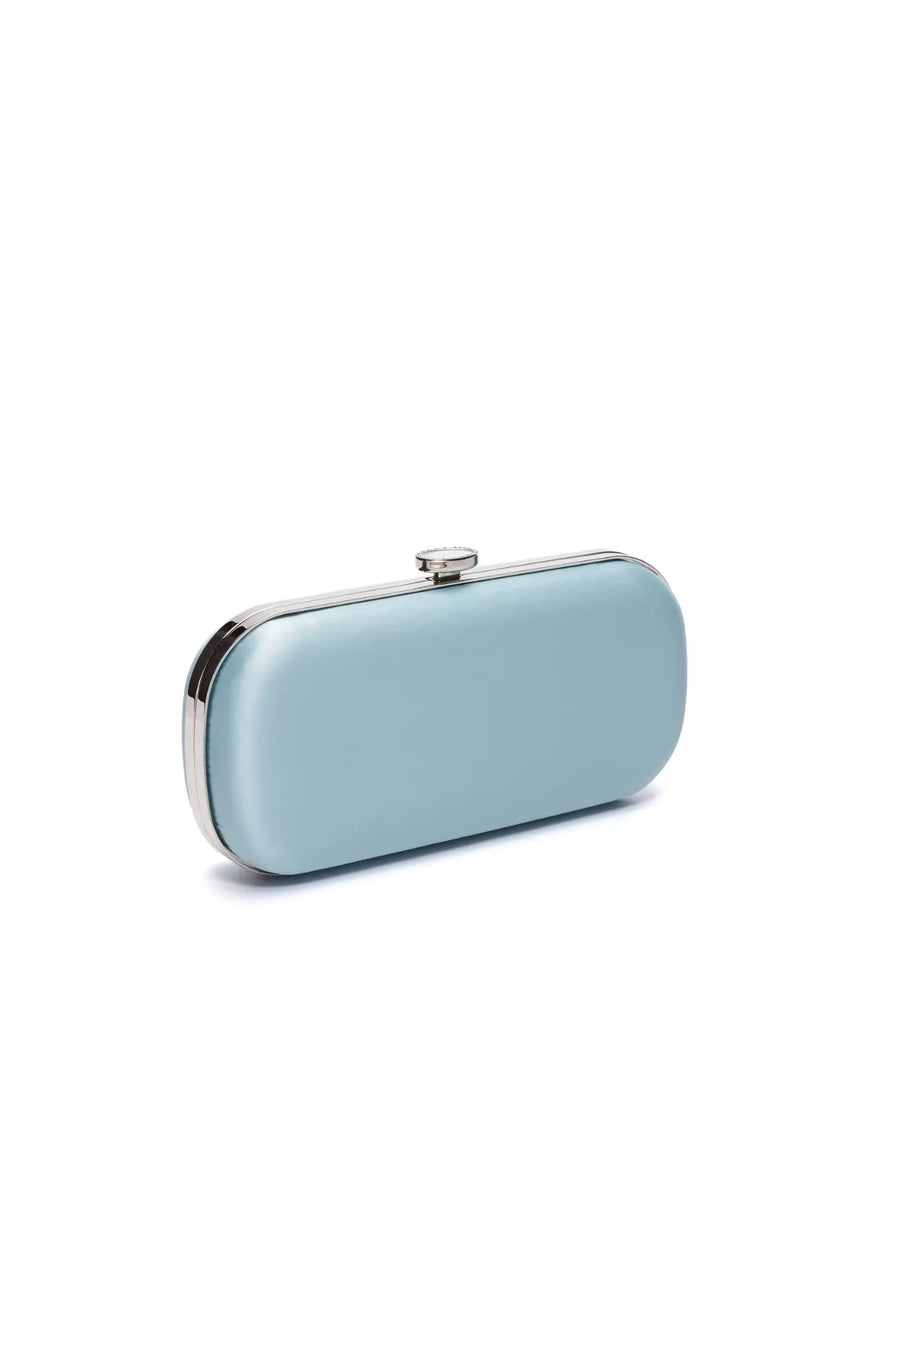 Cinderella Blue Satin Bella Clutch purse with silver trimmings on a white background by The Bella Rosa Collection.